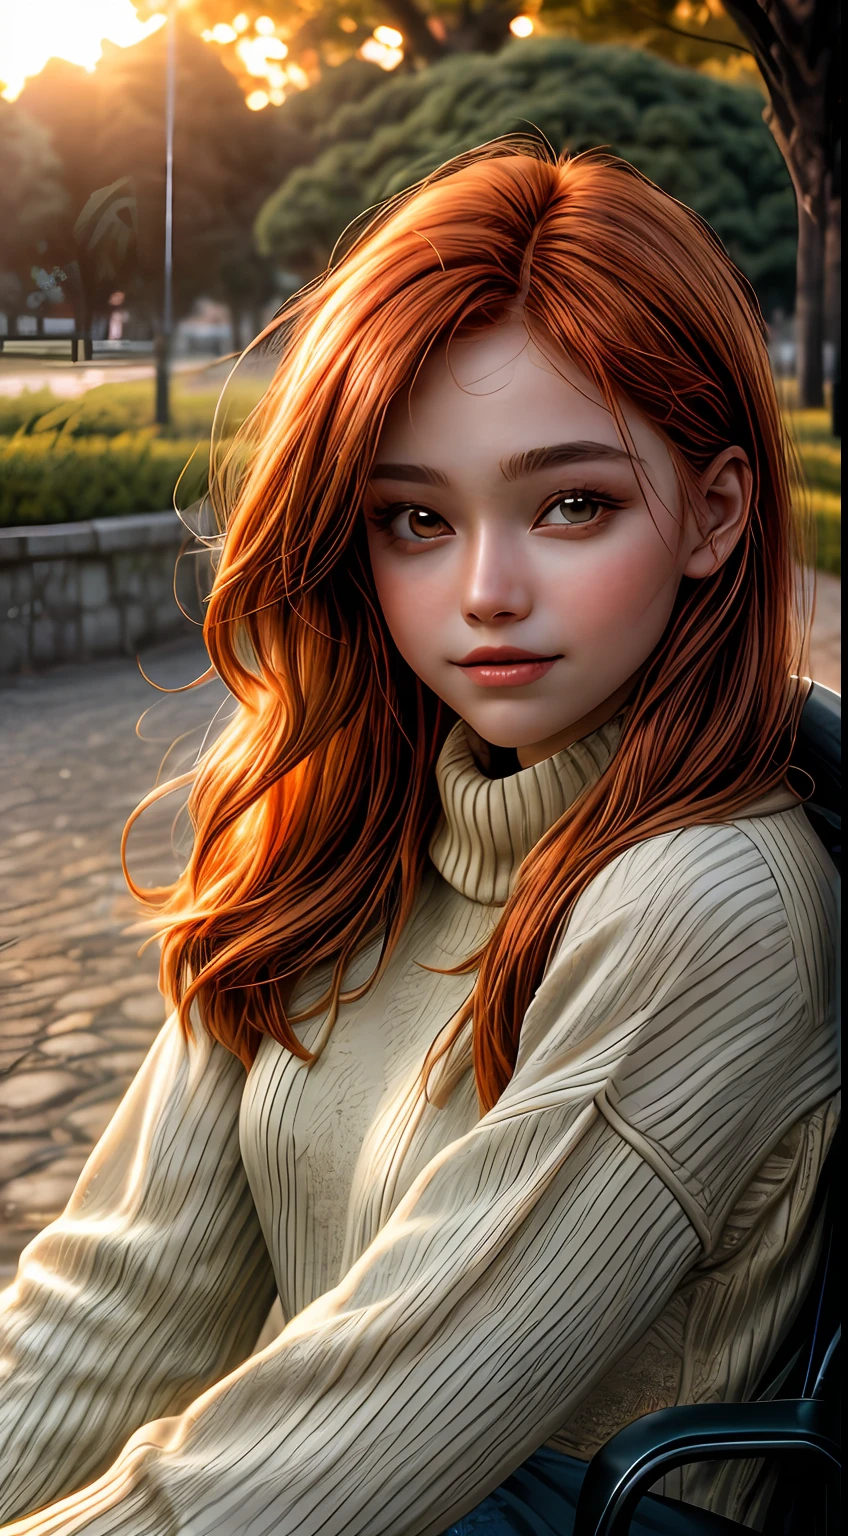 A close-up of a girl's face bathed in orange hues, wearing a sweater, sitting outside a park, as if lit by the soft glow of a sunset, her eyes sparkling with joy and contentment, framed by wisps of flowing auburn hair, Photography, shot with a 35mm lens